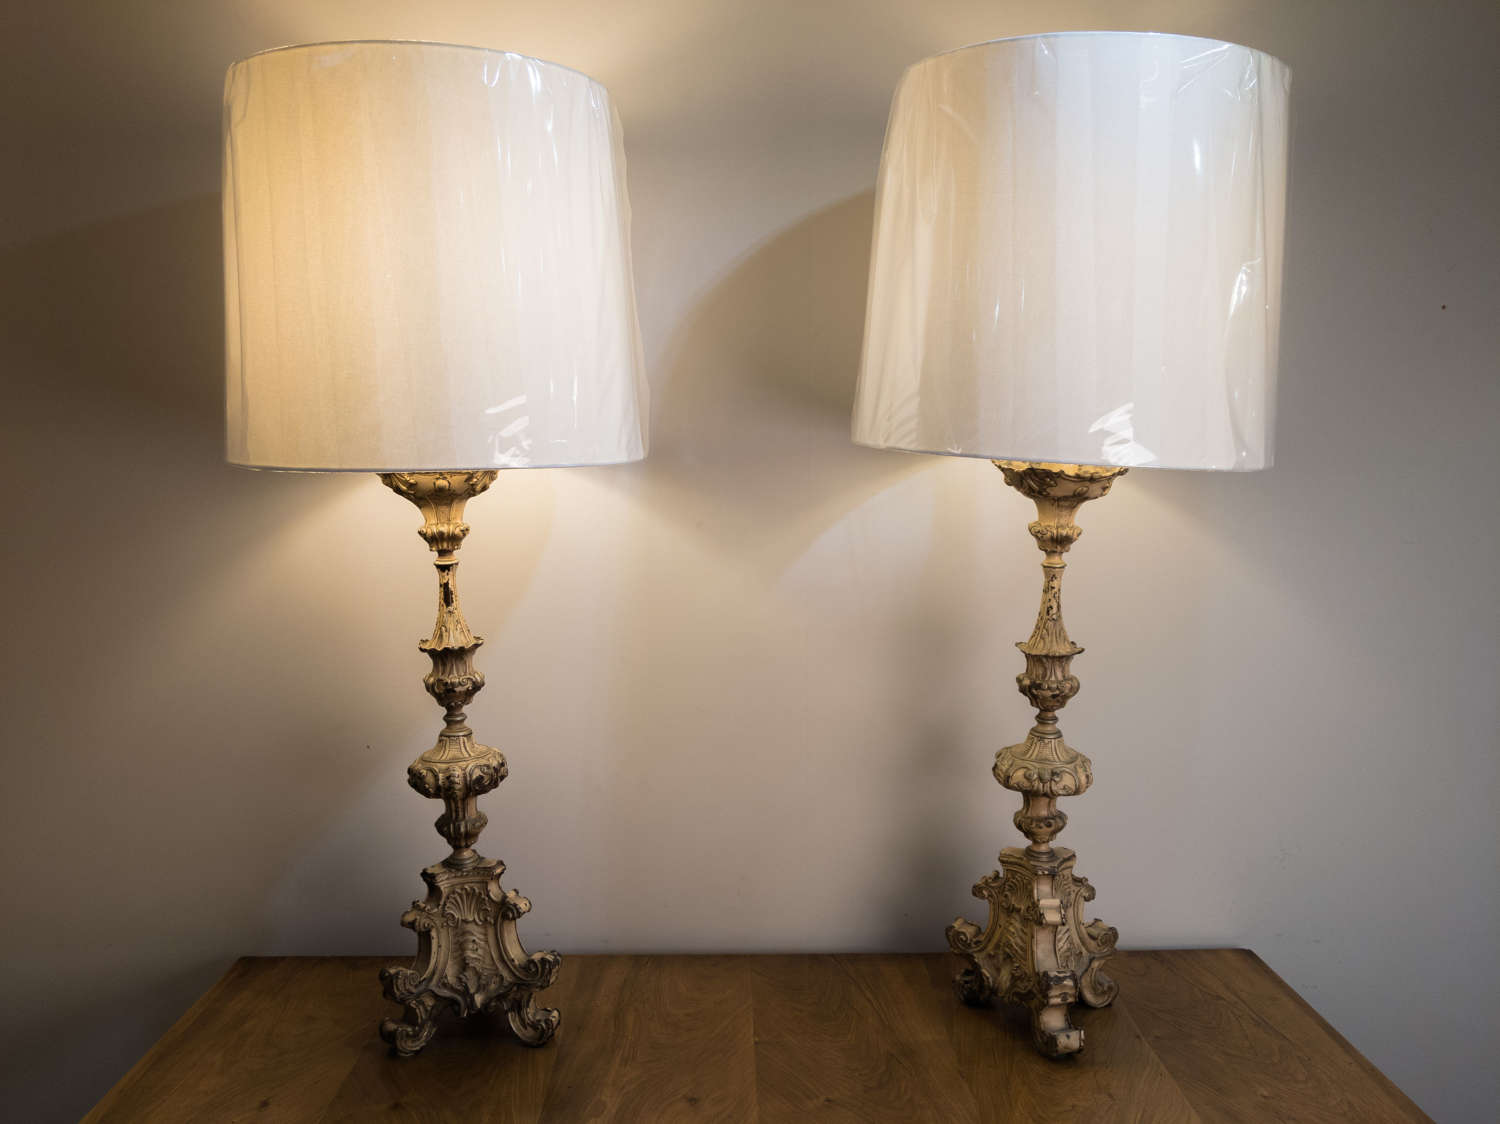 An early 19th Century pair of Tole Candlestick lamps